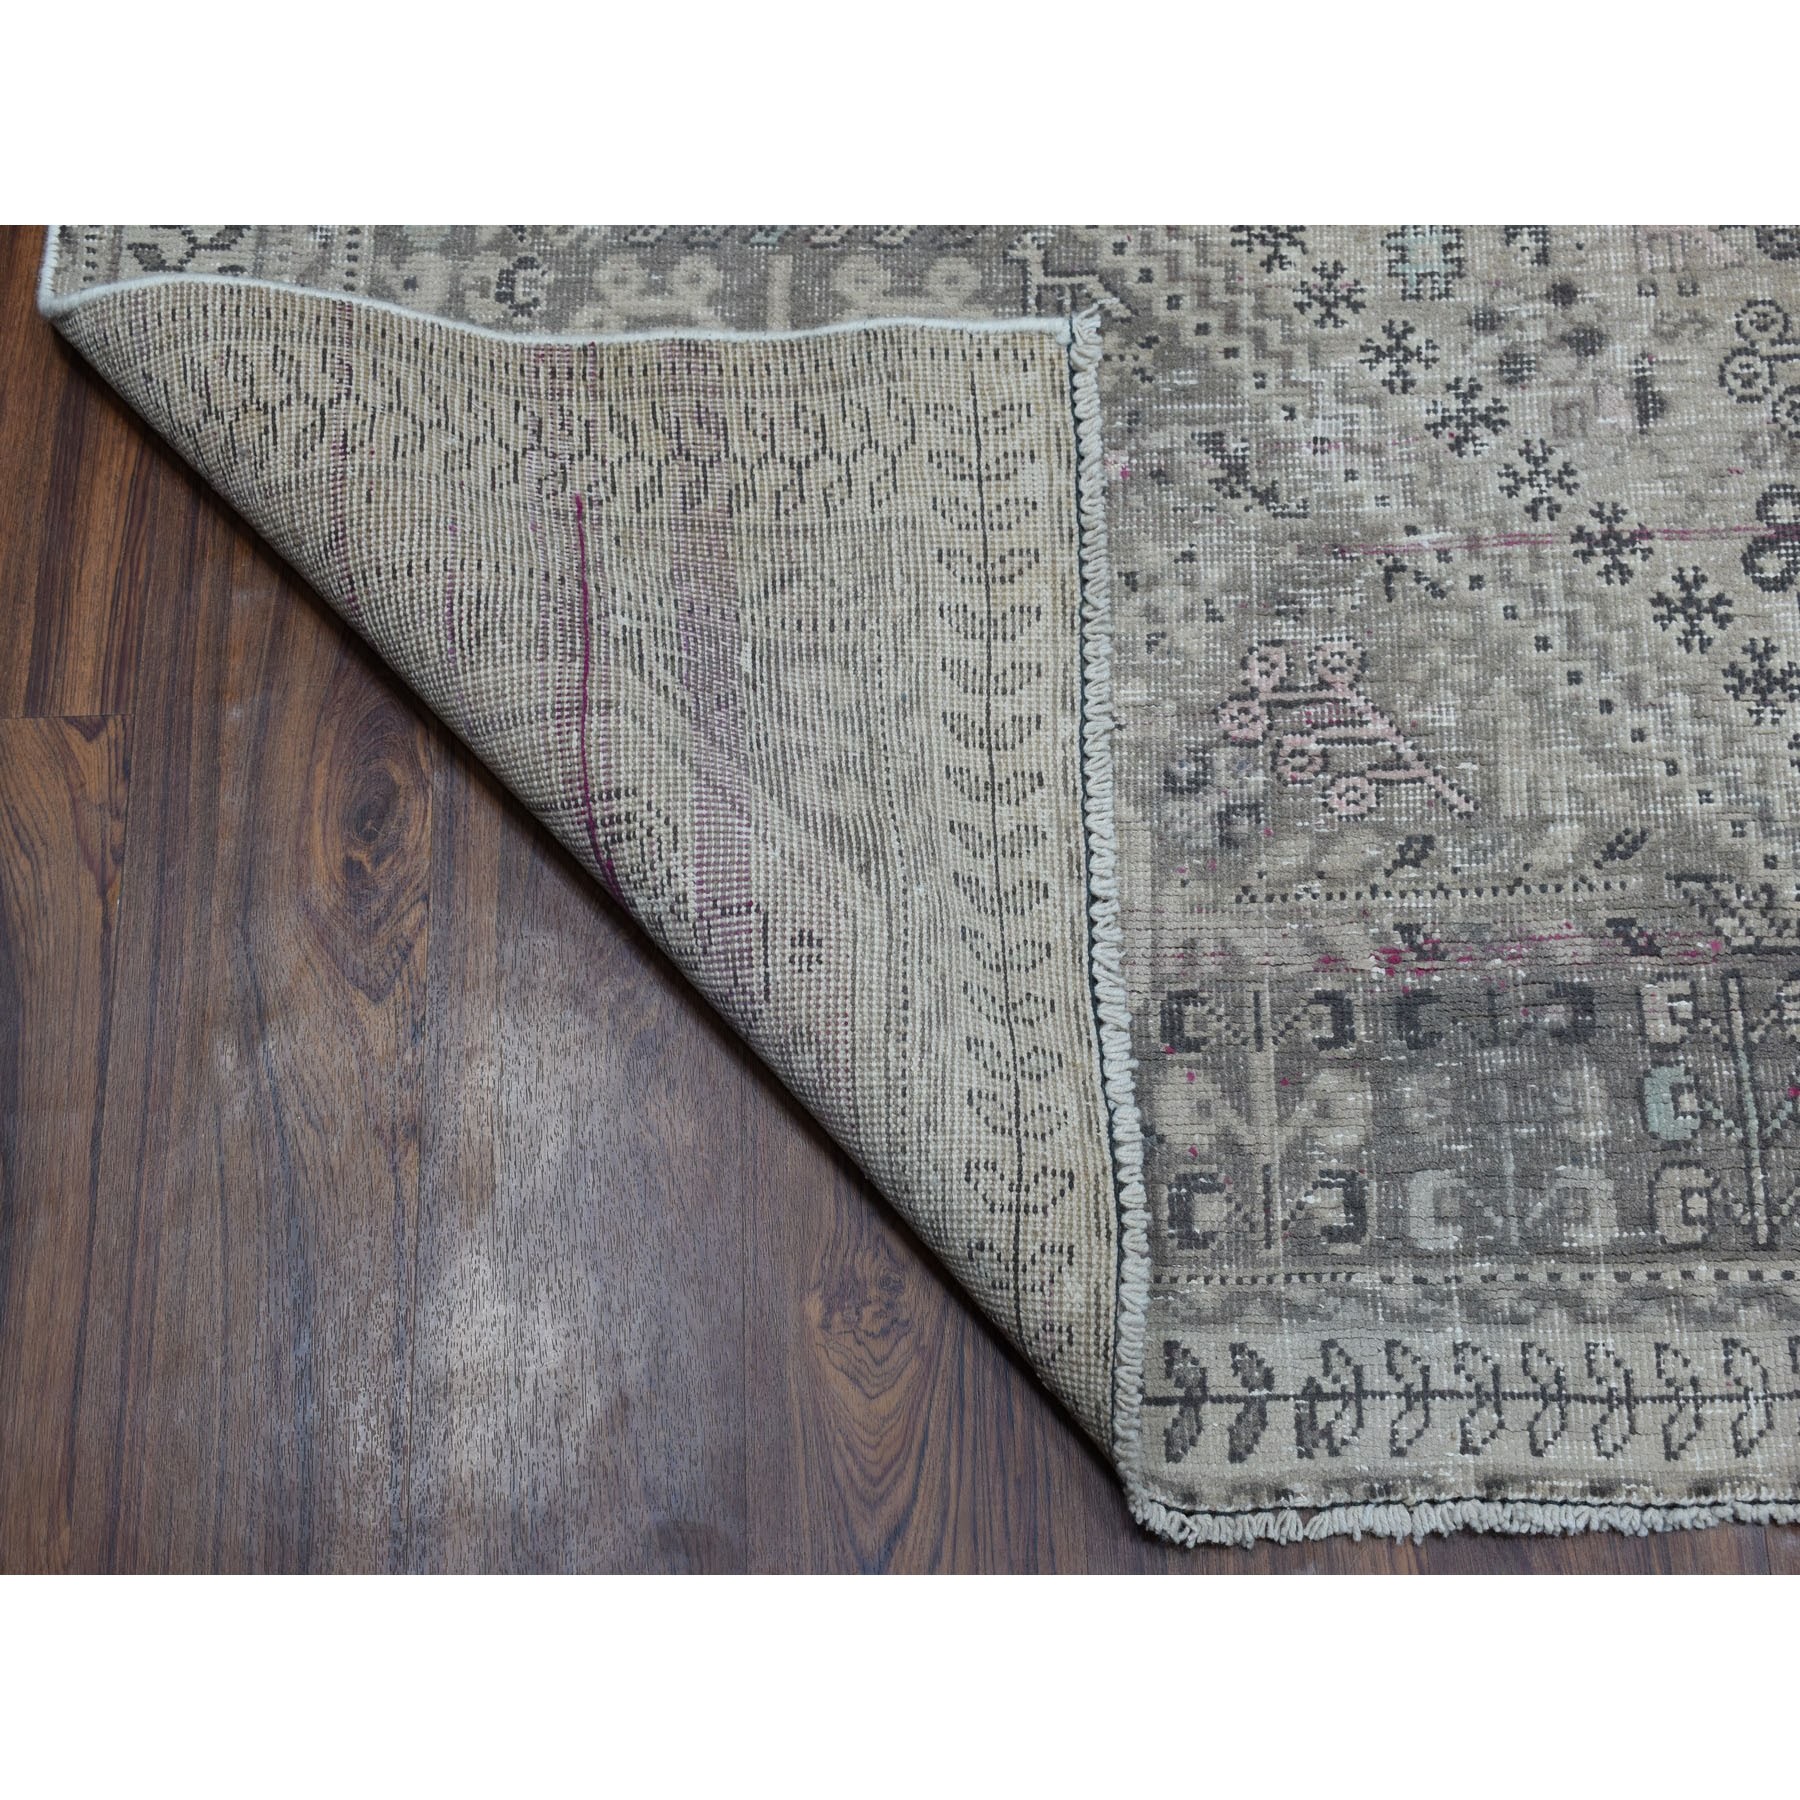 6-6 x9-3  Vintage And Worn Down Distressed Colors Persian Qashqai Hand Knotted Bohemian Rug 